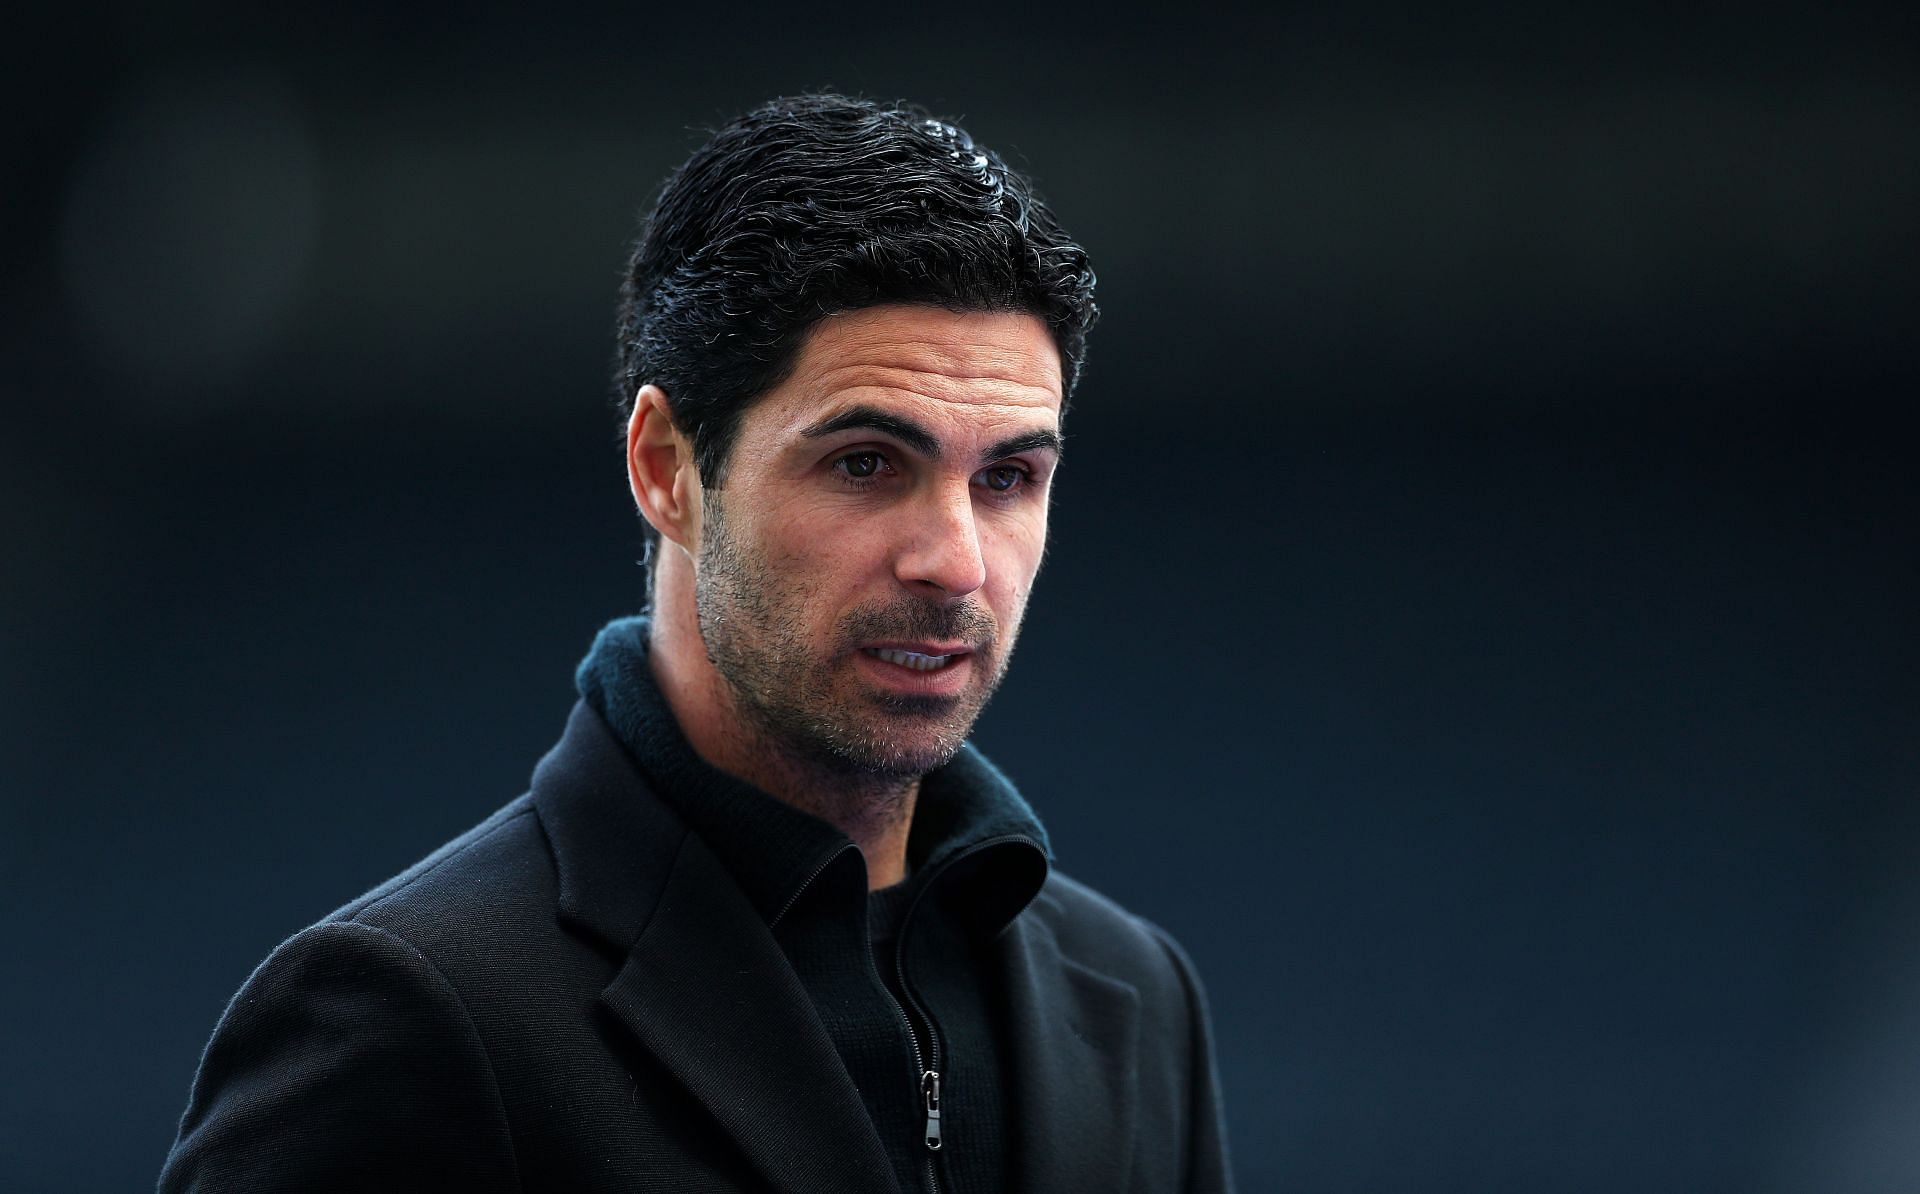 Arteta has had a topsy-turvy campaign in charge at the Emirates